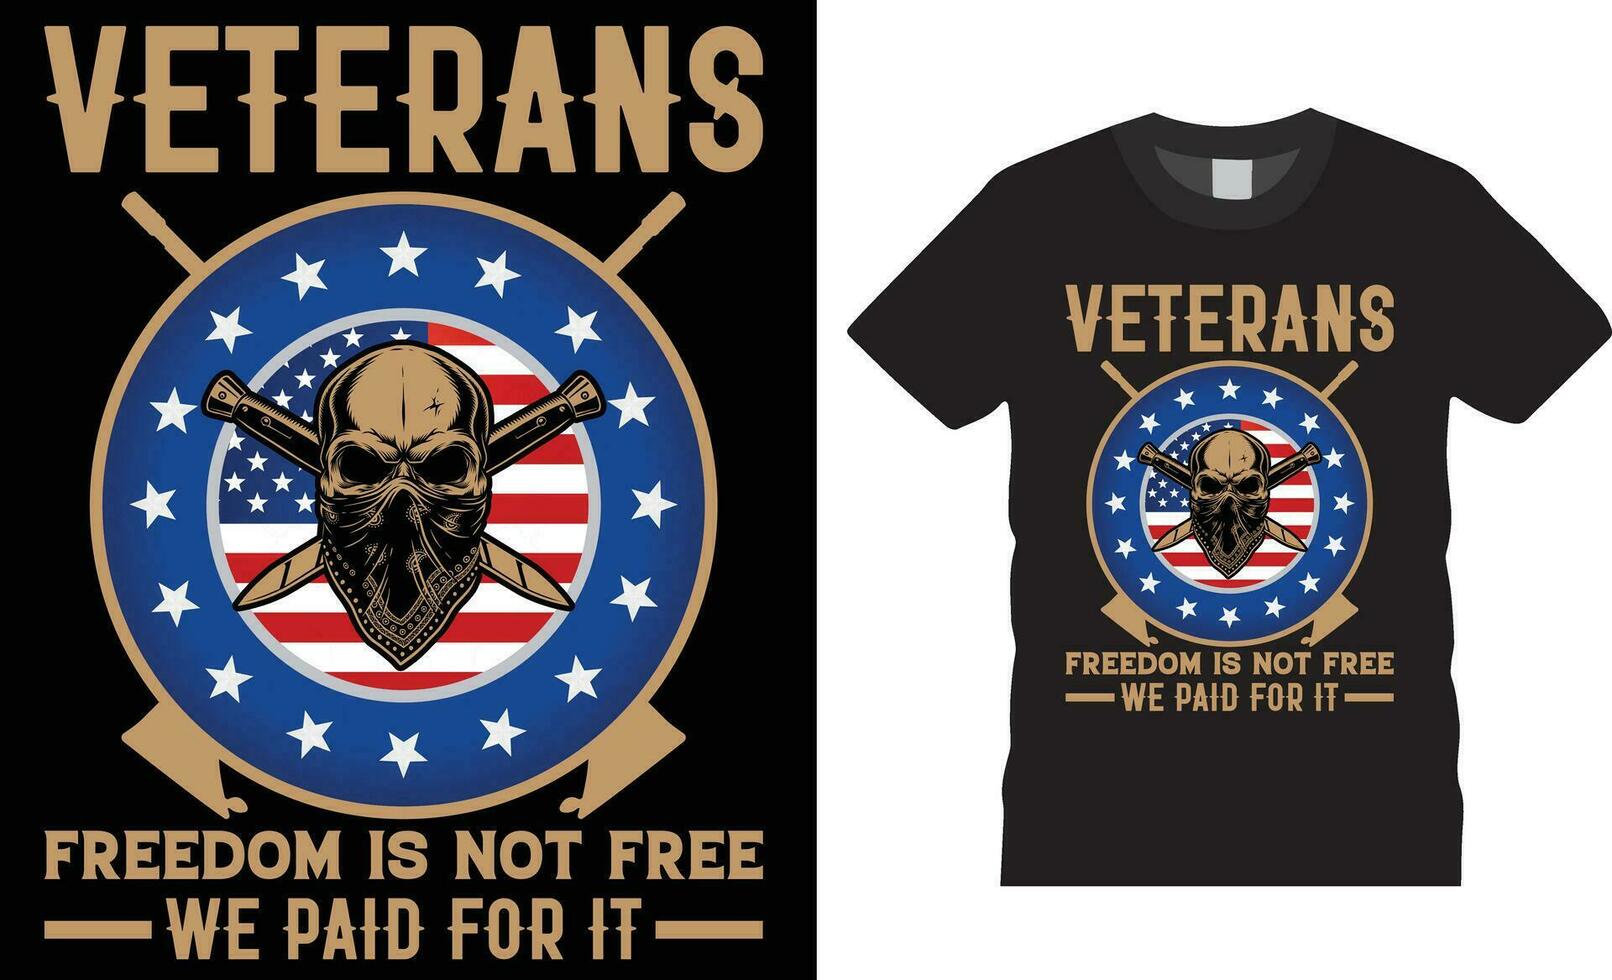 Veteran freedom is not free we paid for it American Veteran t-shirt design vector template